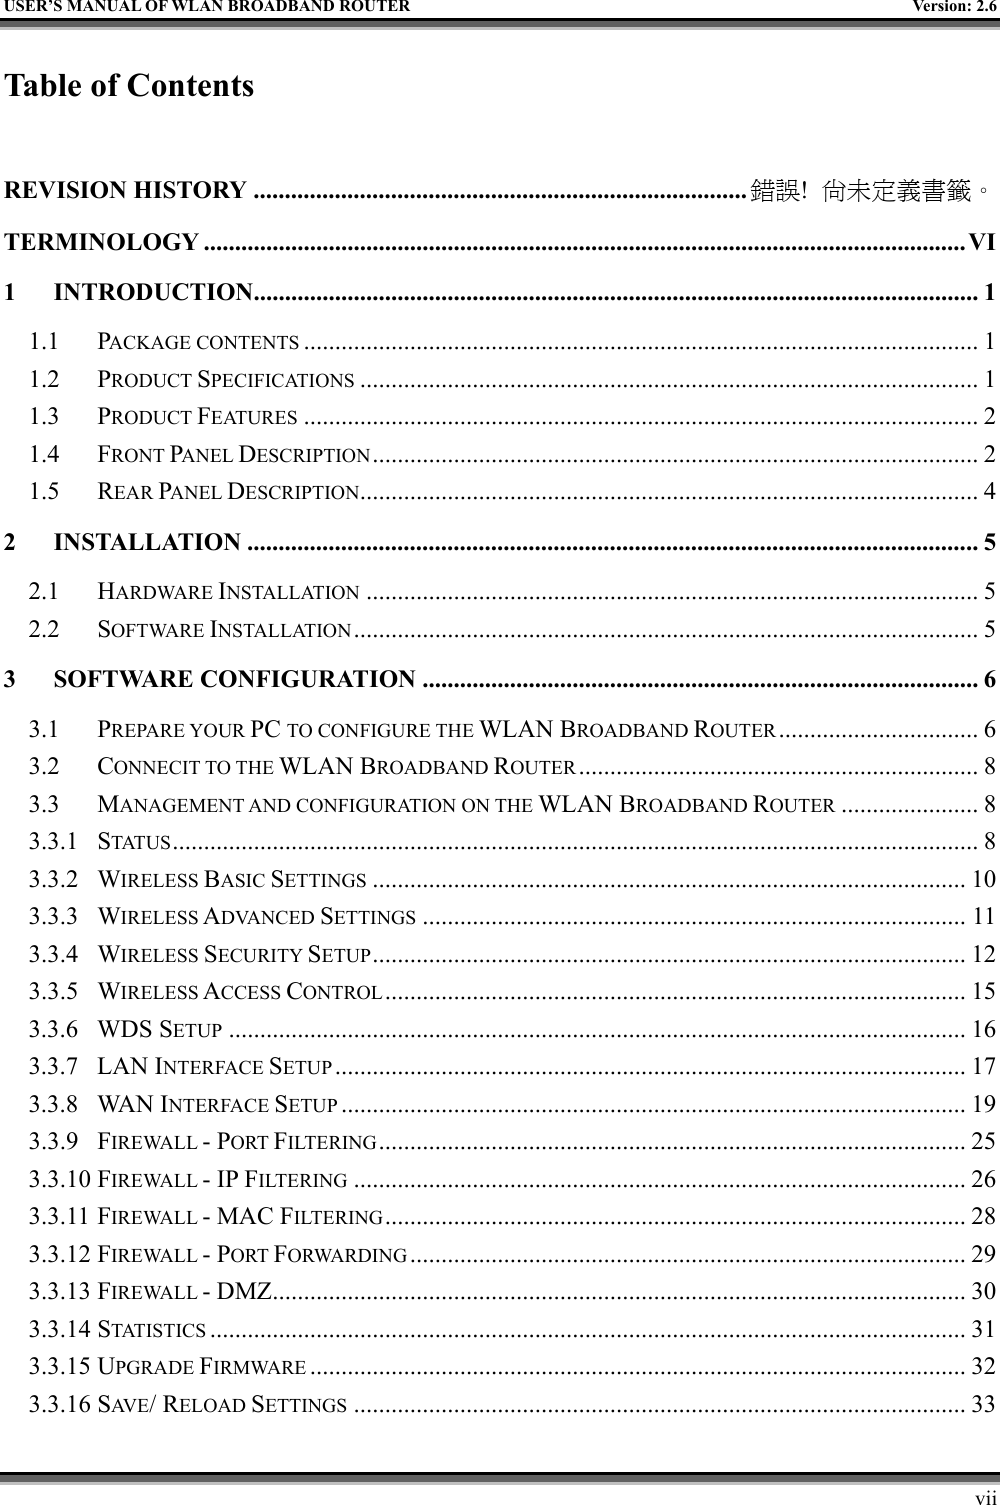   USER’S MANUAL OF WLAN BROADBAND ROUTER    Version: 2.6     vii Table of Contents  REVISION HISTORY ............................................................................... 錯誤!  尚未定義書籤。 TERMINOLOGY ..........................................................................................................................VI 1 INTRODUCTION....................................................................................................................1 1.1 PACKAGE CONTENTS ............................................................................................................ 1 1.2 PRODUCT SPECIFICATIONS ................................................................................................... 1 1.3 PRODUCT FEATURES ............................................................................................................ 2 1.4 FRONT PANEL DESCRIPTION................................................................................................. 2 1.5 REAR PANEL DESCRIPTION................................................................................................... 4 2 INSTALLATION ..................................................................................................................... 5 2.1 HARDWARE INSTALLATION .................................................................................................. 5 2.2 SOFTWARE INSTALLATION.................................................................................................... 5 3 SOFTWARE CONFIGURATION ......................................................................................... 6 3.1 PREPARE YOUR PC TO CONFIGURE THE WLAN BROADBAND ROUTER ................................ 6 3.2 CONNECIT TO THE WLAN BROADBAND ROUTER ................................................................ 8 3.3 MANAGEMENT AND CONFIGURATION ON THE WLAN BROADBAND ROUTER ...................... 8 3.3.1 STATUS ................................................................................................................................. 8 3.3.2 WIRELESS BASIC SETTINGS ............................................................................................... 10 3.3.3 WIRELESS ADVANCED SETTINGS ....................................................................................... 11 3.3.4 WIRELESS SECURITY SETUP............................................................................................... 12 3.3.5 WIRELESS ACCESS CONTROL............................................................................................. 15 3.3.6 WDS SETUP ...................................................................................................................... 16 3.3.7 LAN INTERFACE SETUP ..................................................................................................... 17 3.3.8 WAN INTERFACE SETUP .................................................................................................... 19 3.3.9 FIREWALL - PORT FILTERING.............................................................................................. 25 3.3.10 FIREWALL - IP FILTERING .................................................................................................. 26 3.3.11 FIREWALL - MAC FILTERING............................................................................................. 28 3.3.12 FIREWALL - PORT FORWARDING ......................................................................................... 29 3.3.13 FIREWALL - DMZ............................................................................................................... 30 3.3.14 STATISTICS ......................................................................................................................... 31 3.3.15 UPGRADE FIRMWARE ......................................................................................................... 32 3.3.16 SAV E / RELOAD SETTINGS .................................................................................................. 33 